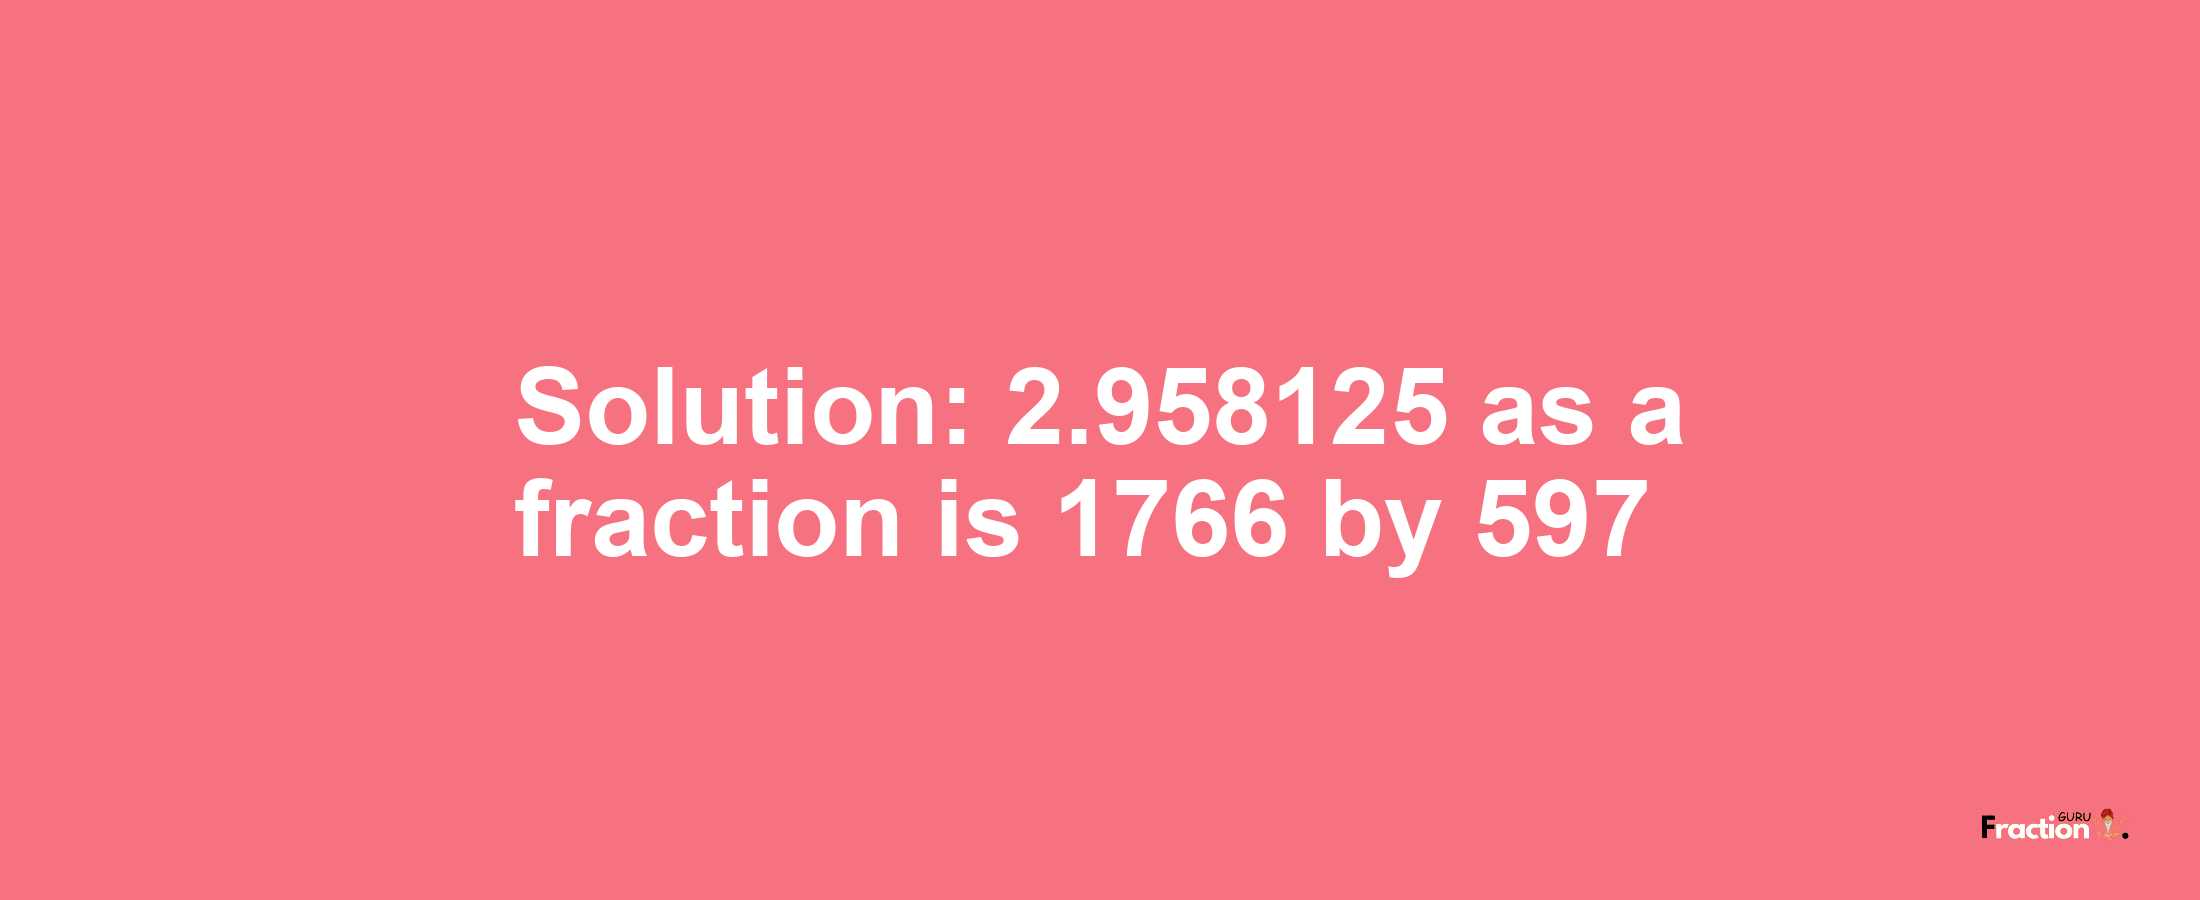 Solution:2.958125 as a fraction is 1766/597